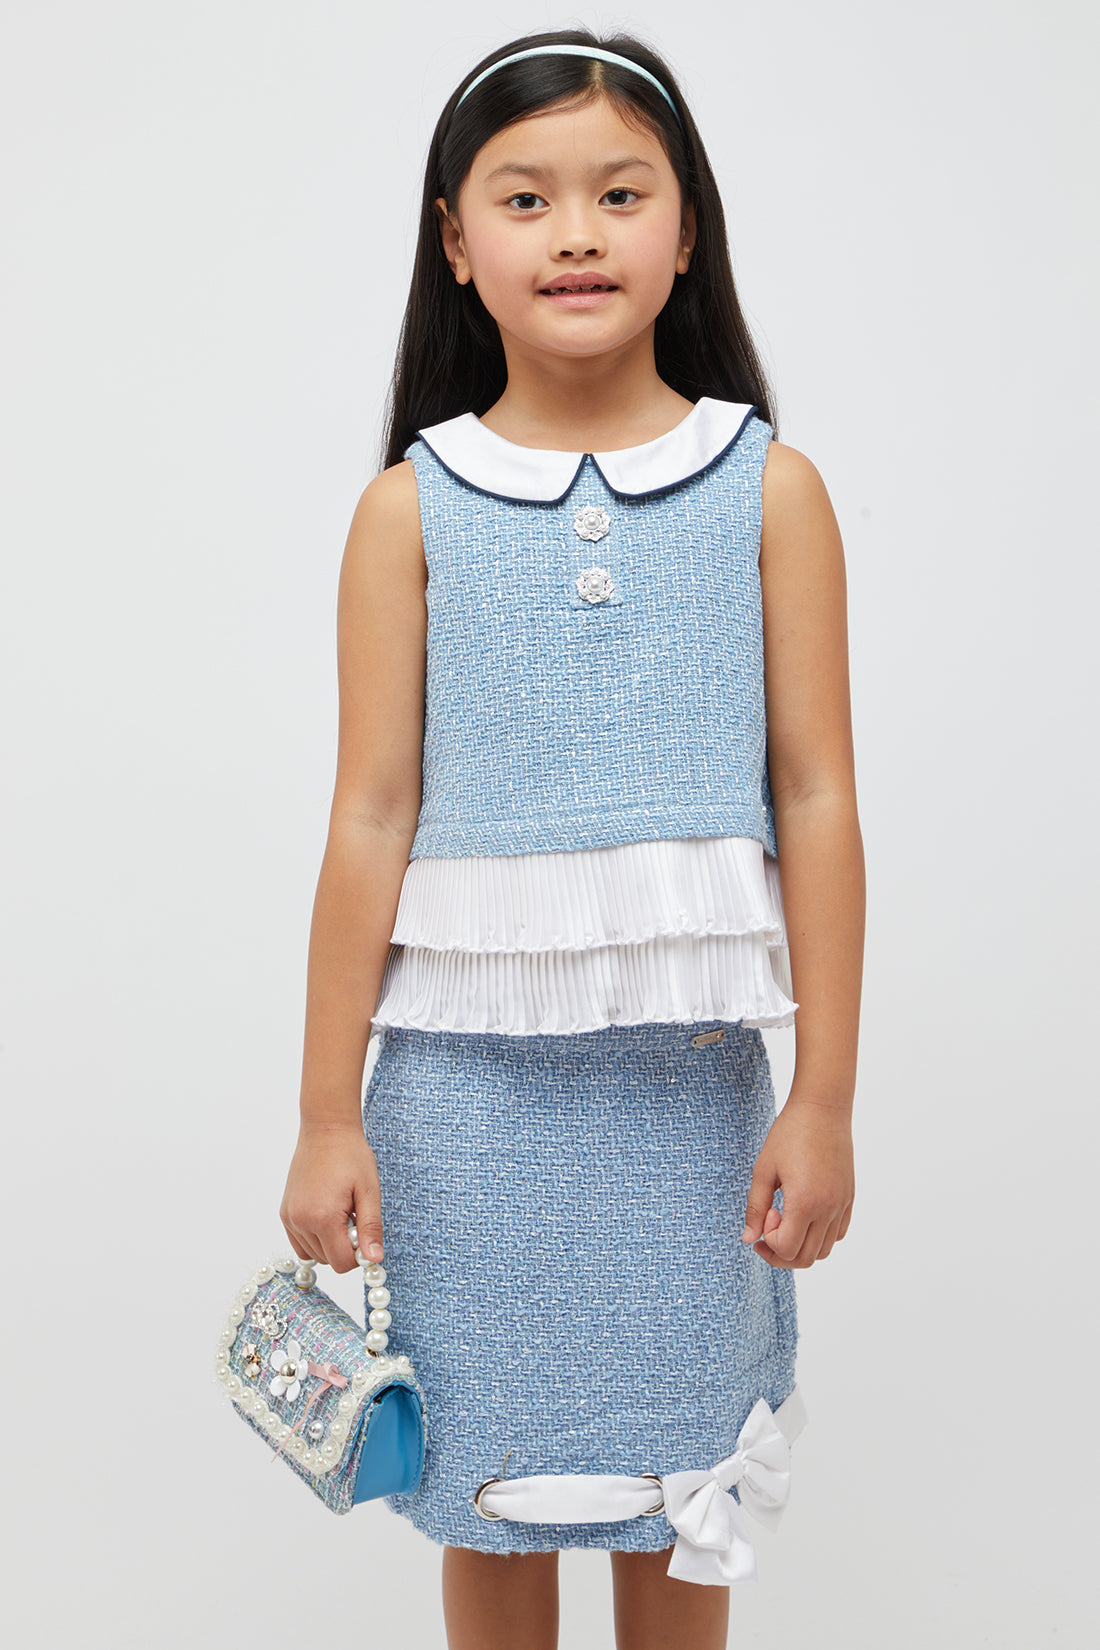 One Friday Blue And White Pleated Top